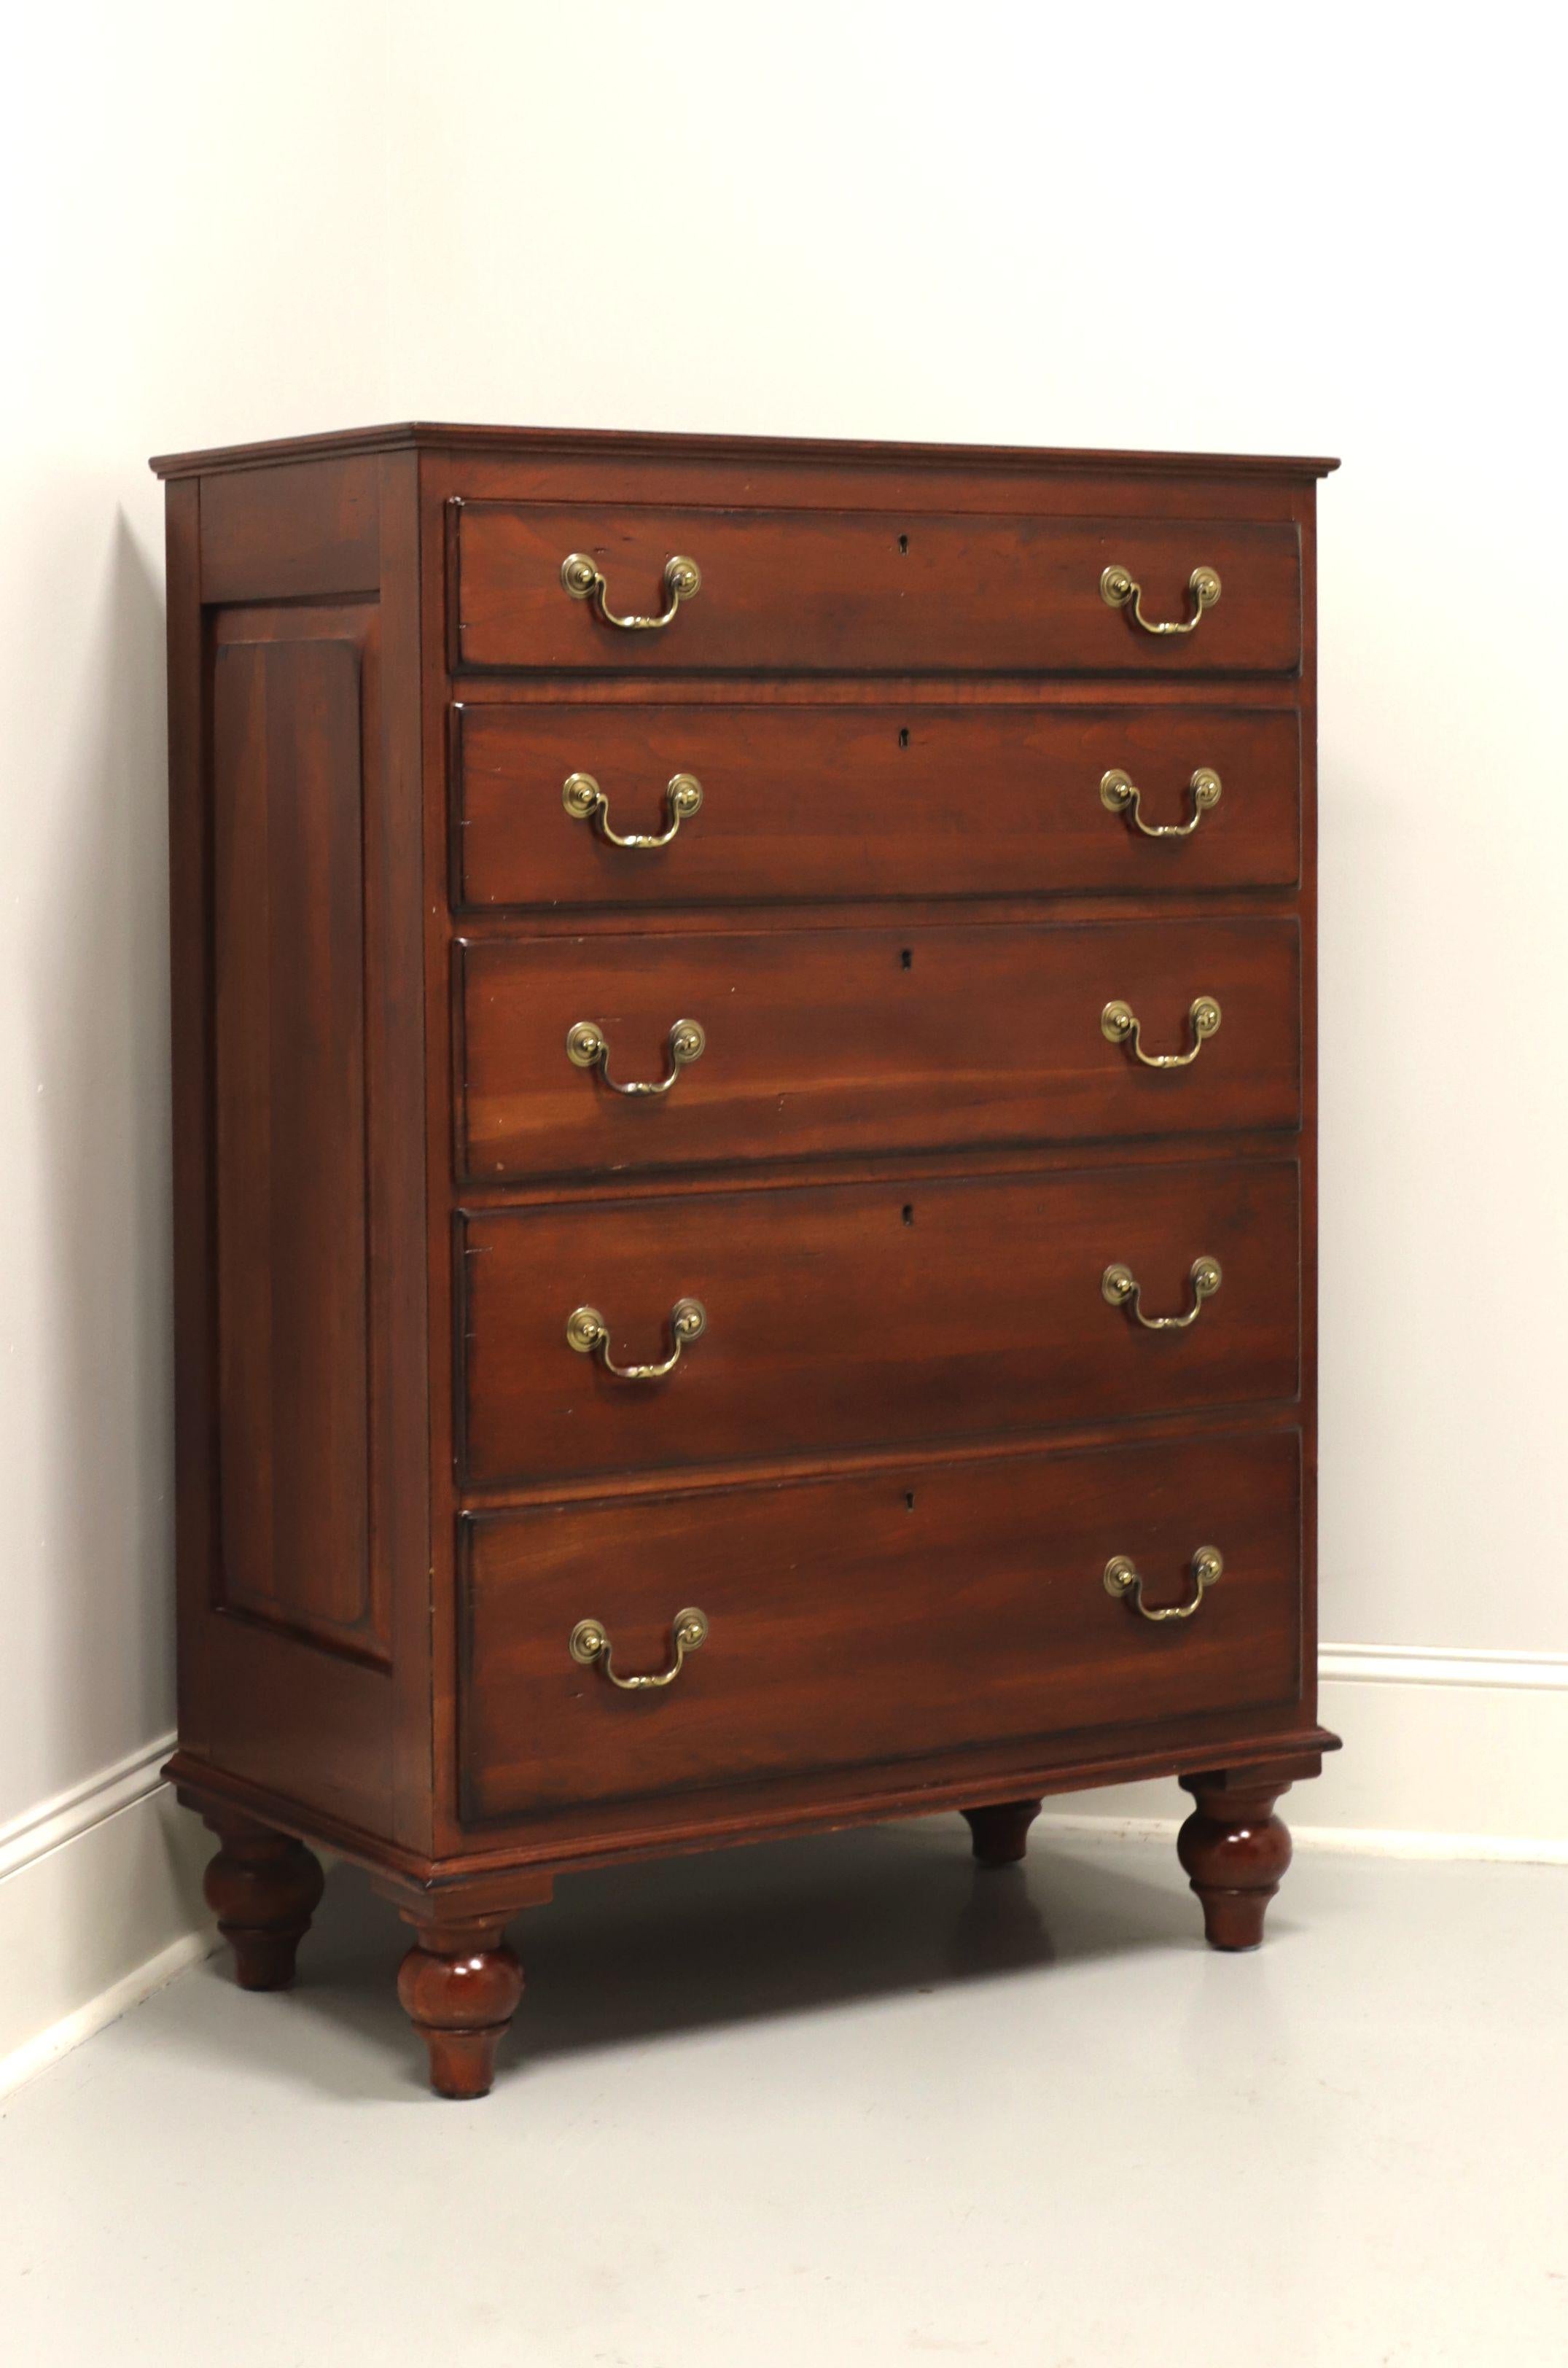 LEXINGTON Bob Timberlake Solid Cherry Chippendale Chest of Drawers 5